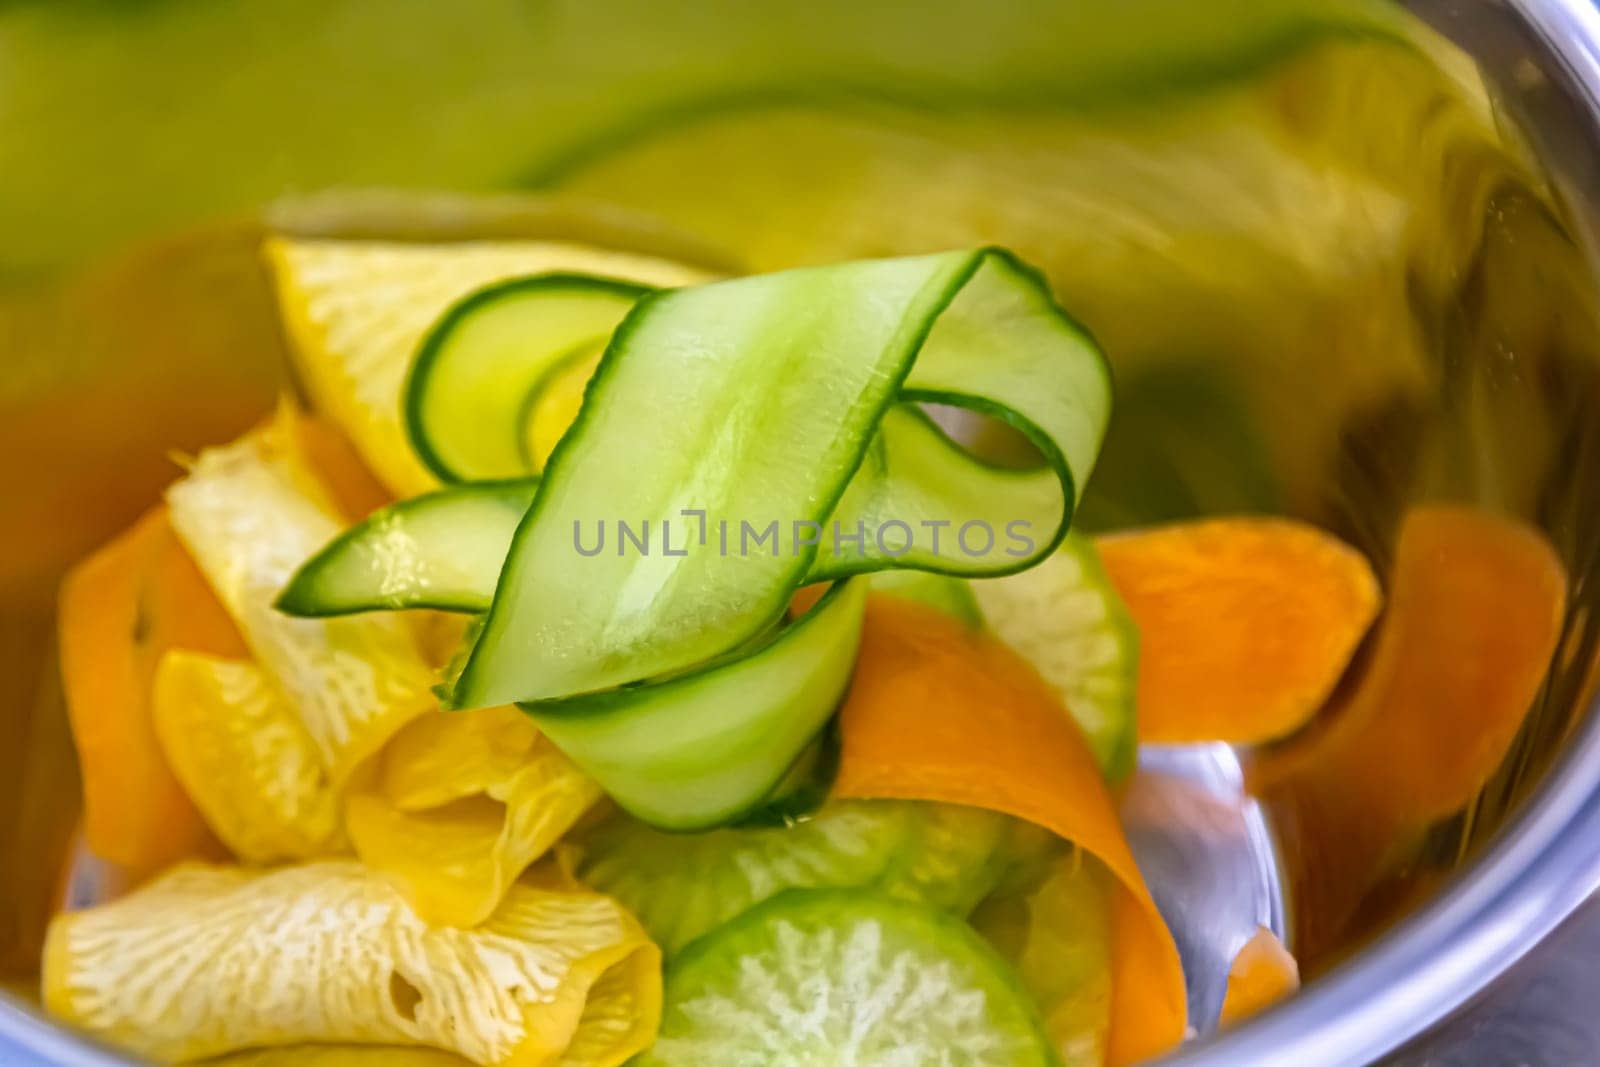 sliced cucumbers, carrots and other vegetables for salad by Milanchikov